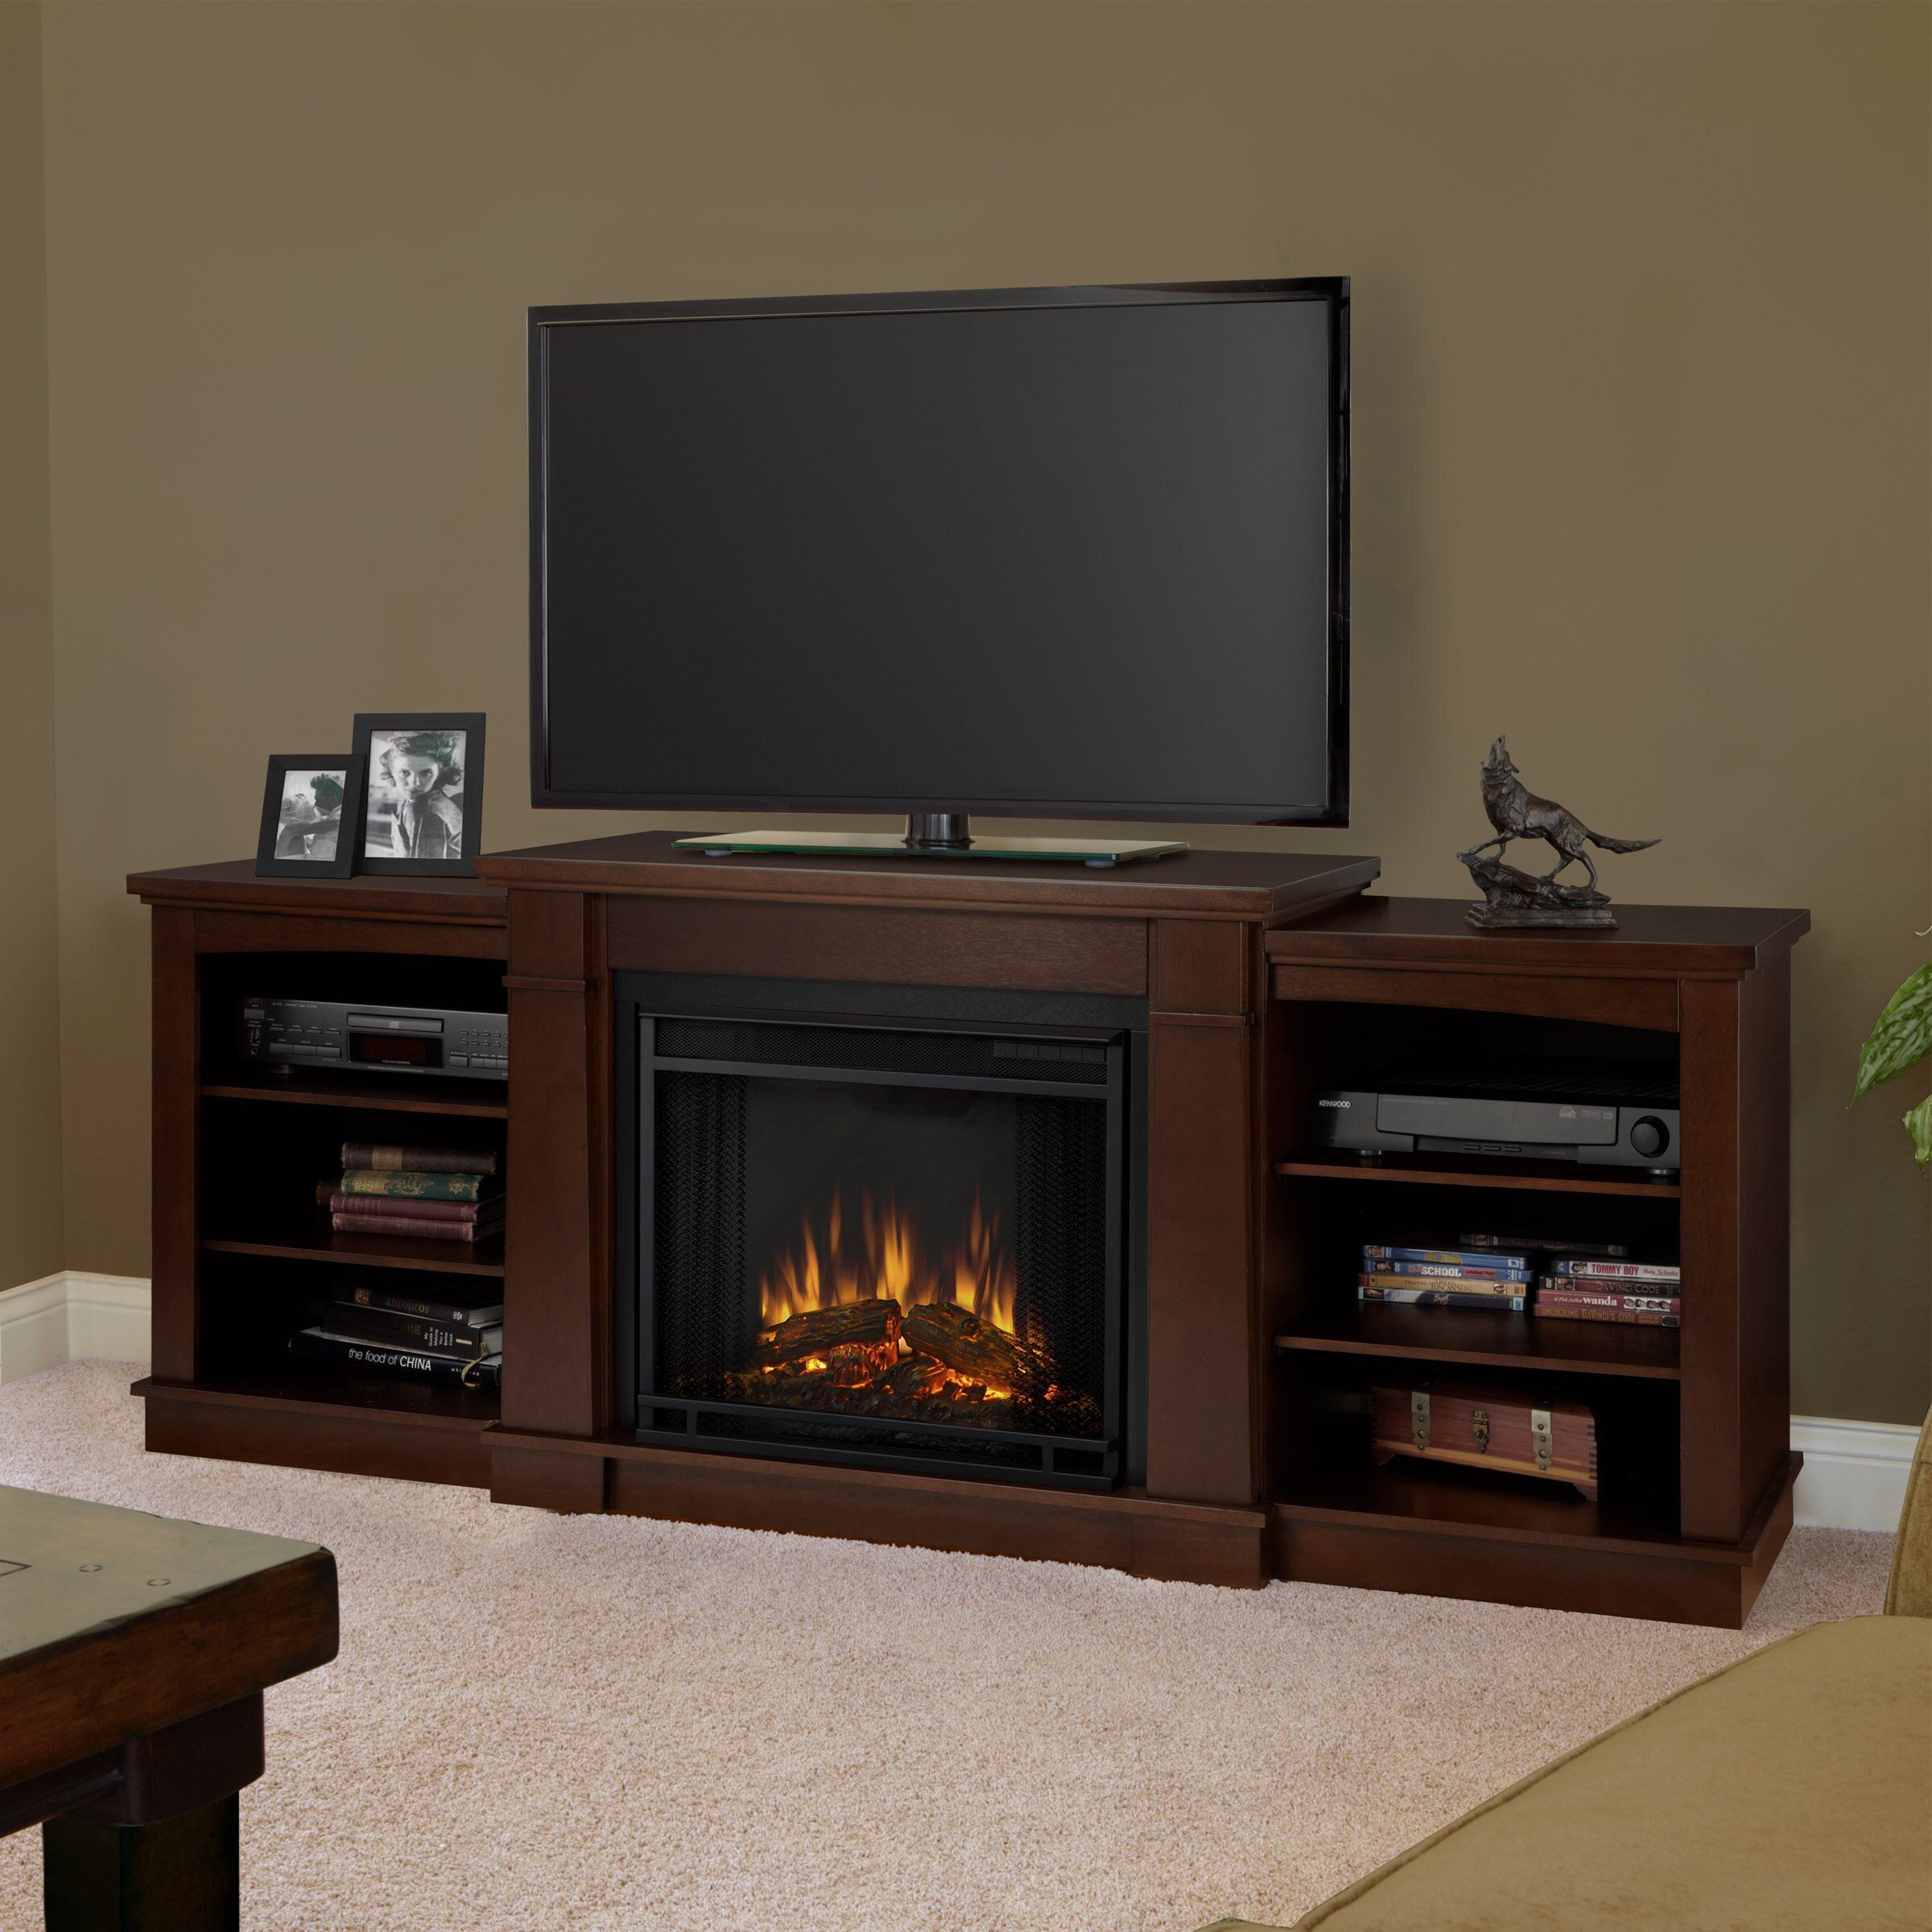 Real Flame Hawthorne Tv Stand With Electric Fireplace & Reviews | Wayfair In Electric Fireplace Entertainment Centers (View 14 of 20)